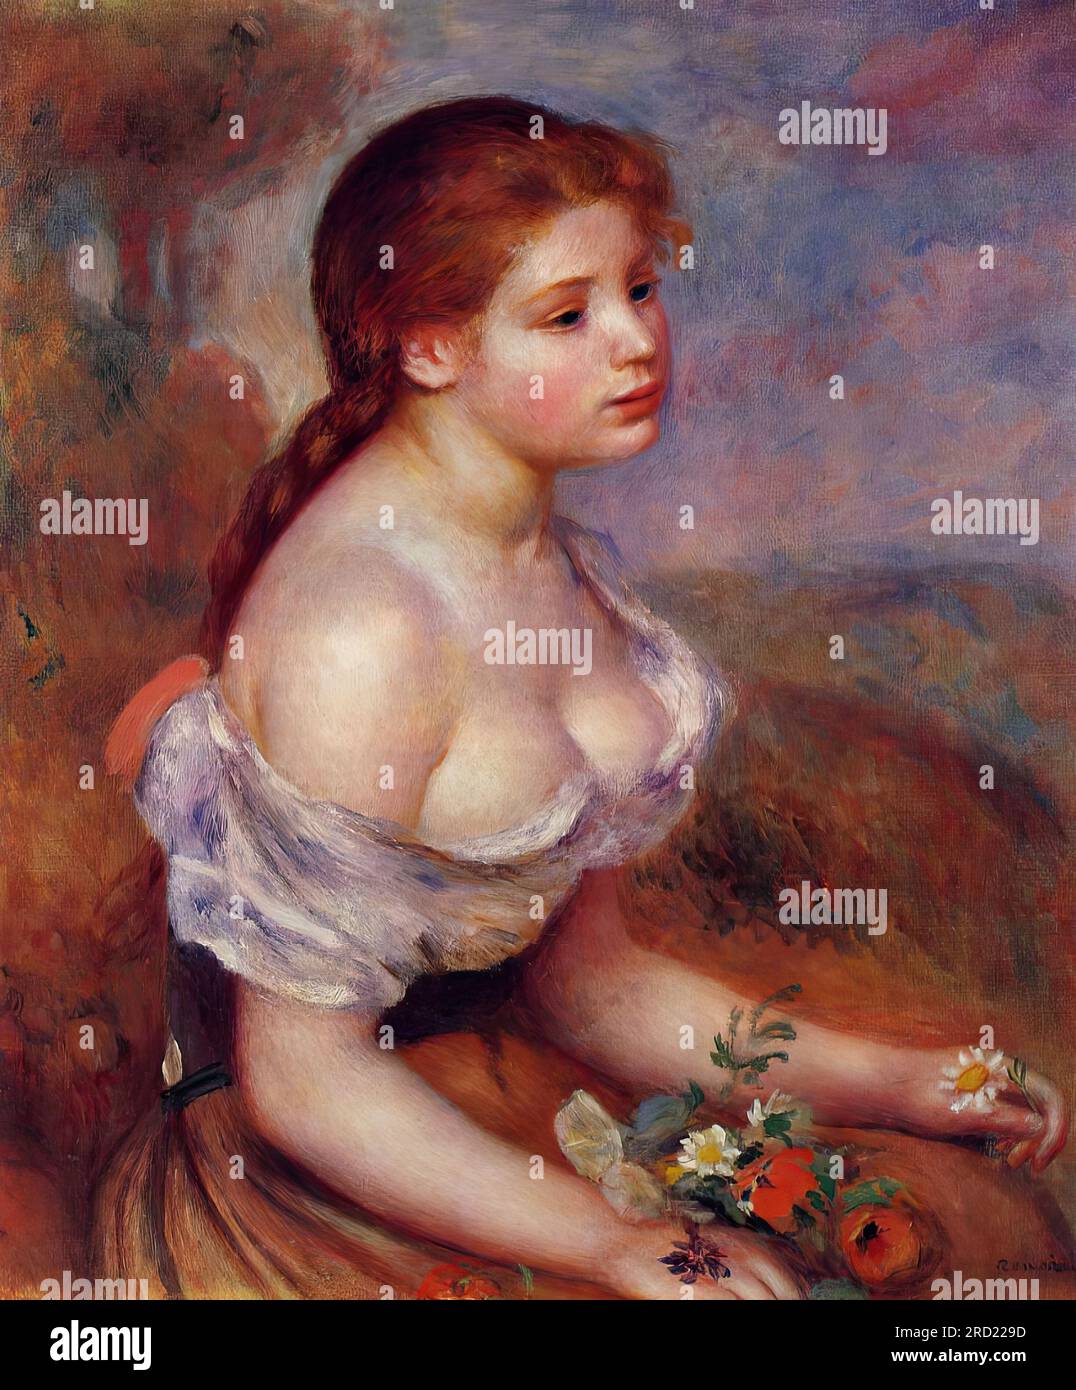 Pierre-Auguste Renoir – Young Girl with Daisies 1889 Stock Photo